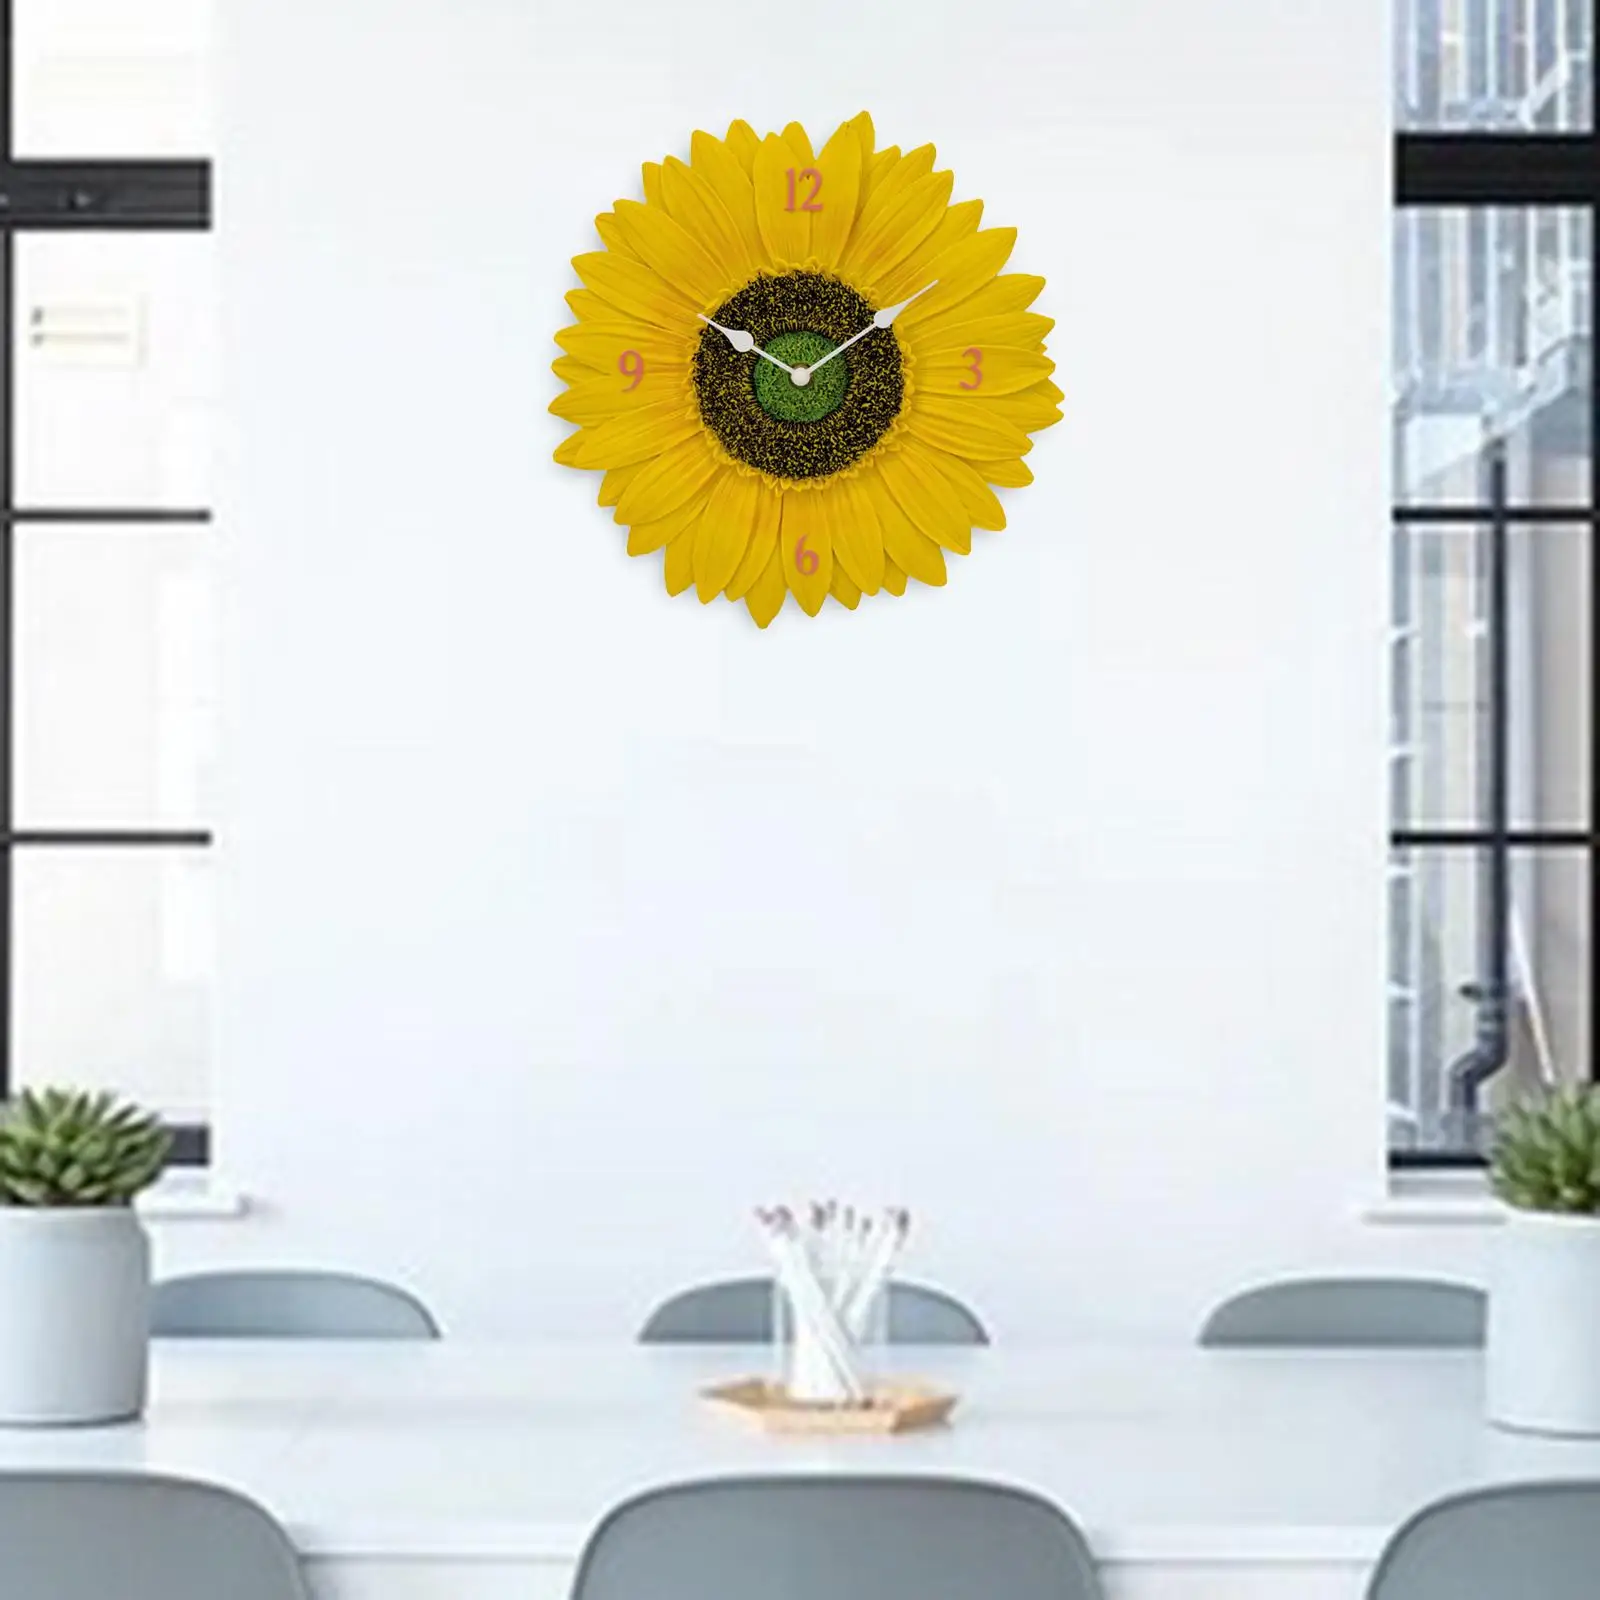 Sunflower Wall Clock Non Ticking Silent Waterproof Wall Clock Decorative Large Indoor Outdoor Wall Clock for Bathroom Farmhouse